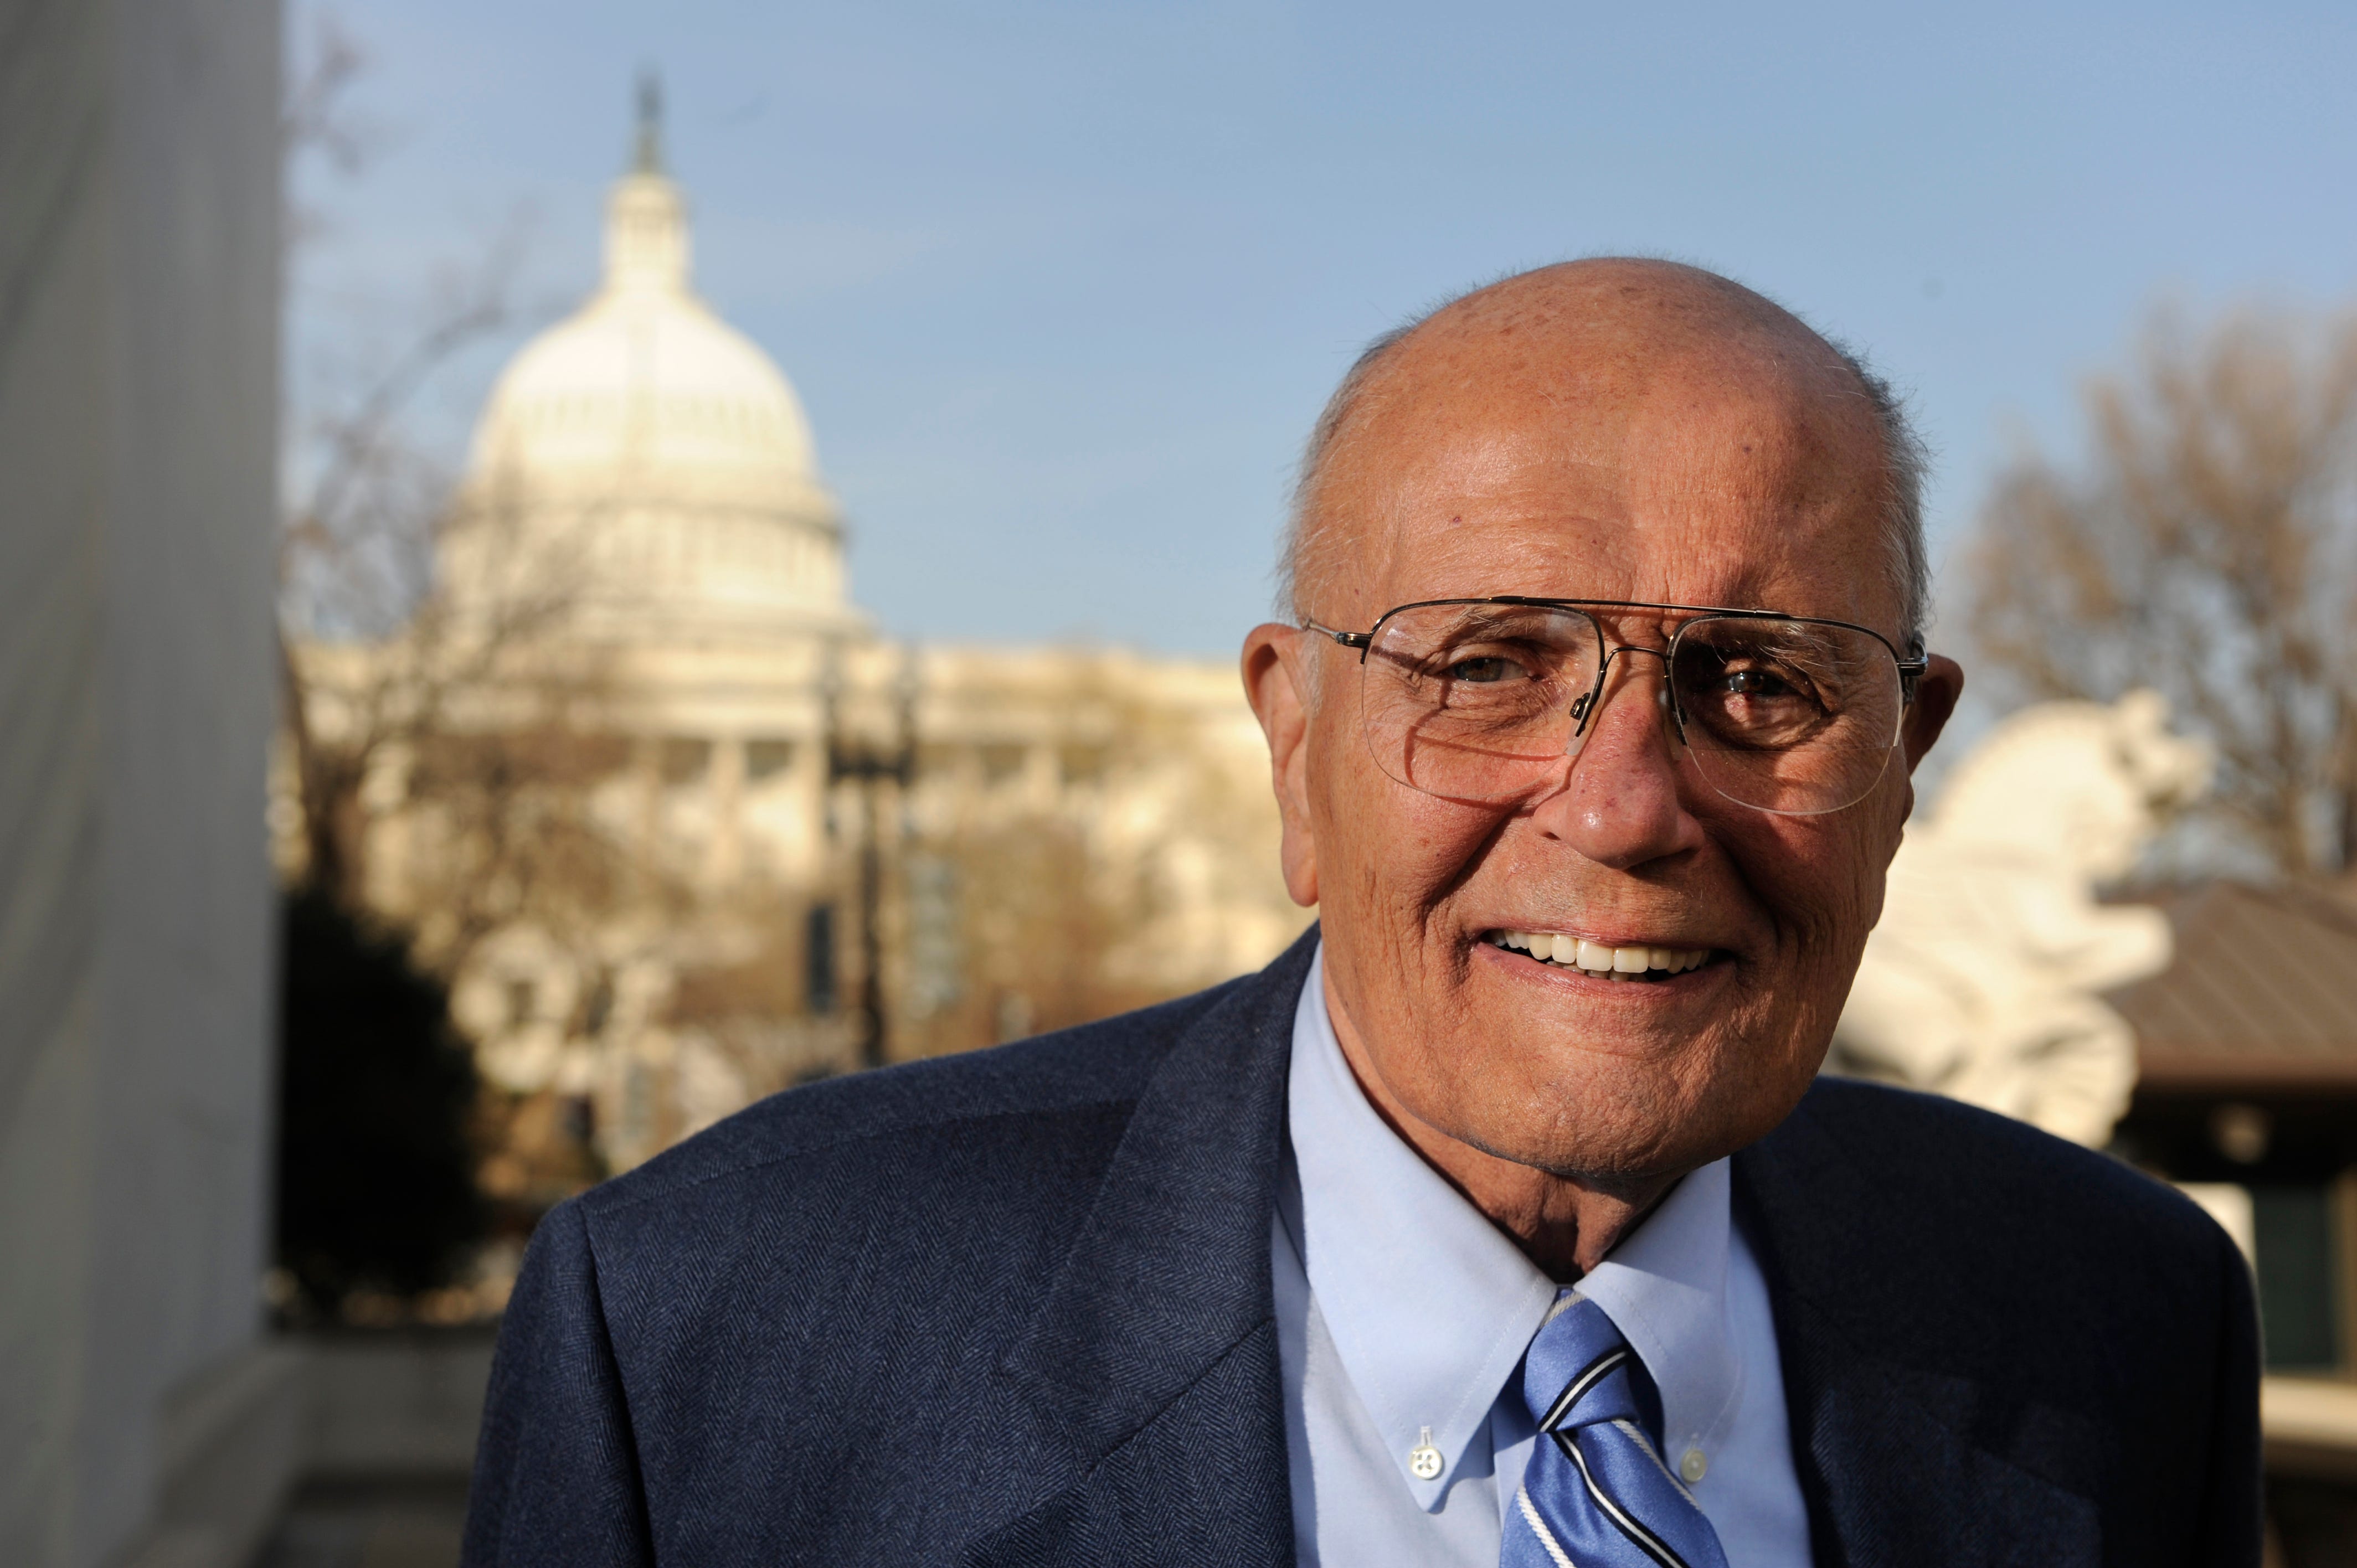 John Dingell Jr., the statesman from Dearborn who served longer in Congress than anyone,  died Thursday, February 7, 2019.  He's seen here working at his Washington D.C. office in the Rayburn House Building  in 2009.